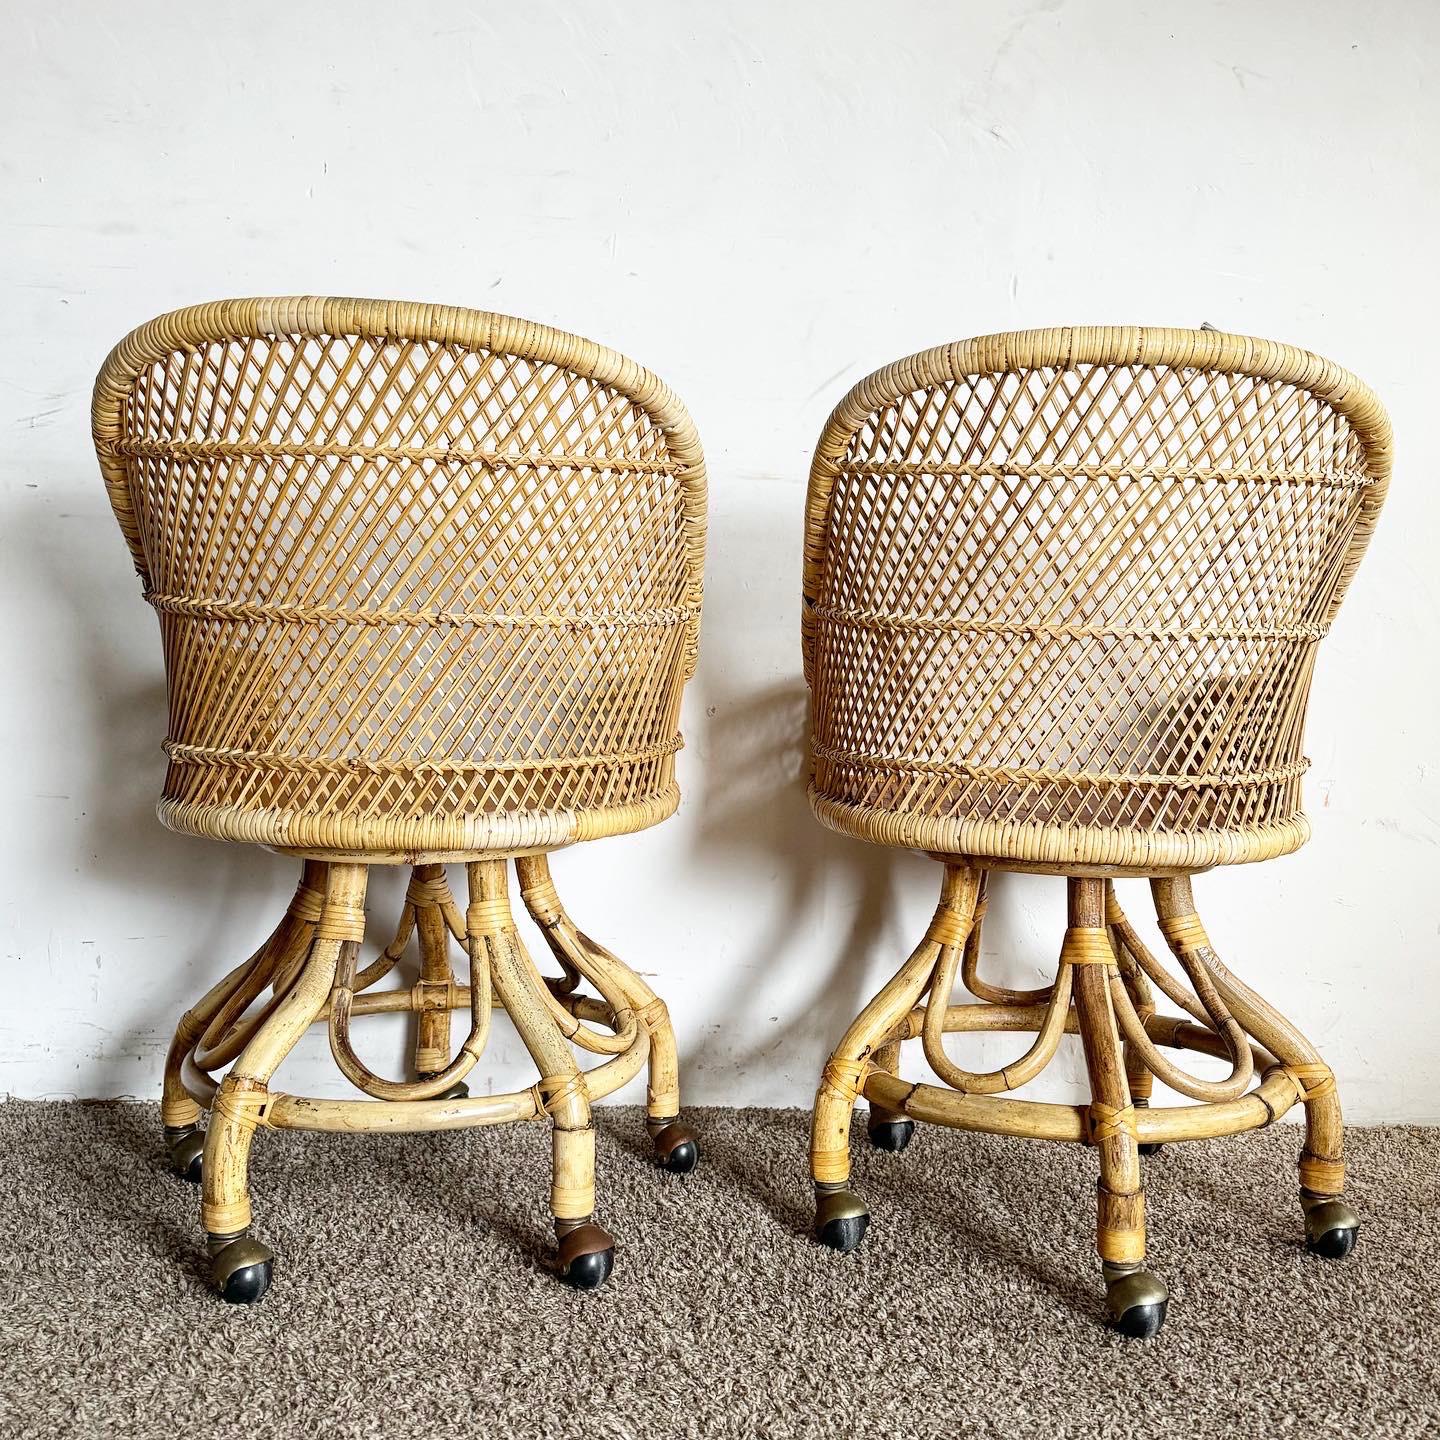 The Boho Chic Buri Rattan Bamboo Swivel Barrel Dining Chairs on Casters, a set of four, blend natural textures with functional design. These chairs offer comfortable seating with a stylish swivel feature and easy mobility, perfect for a